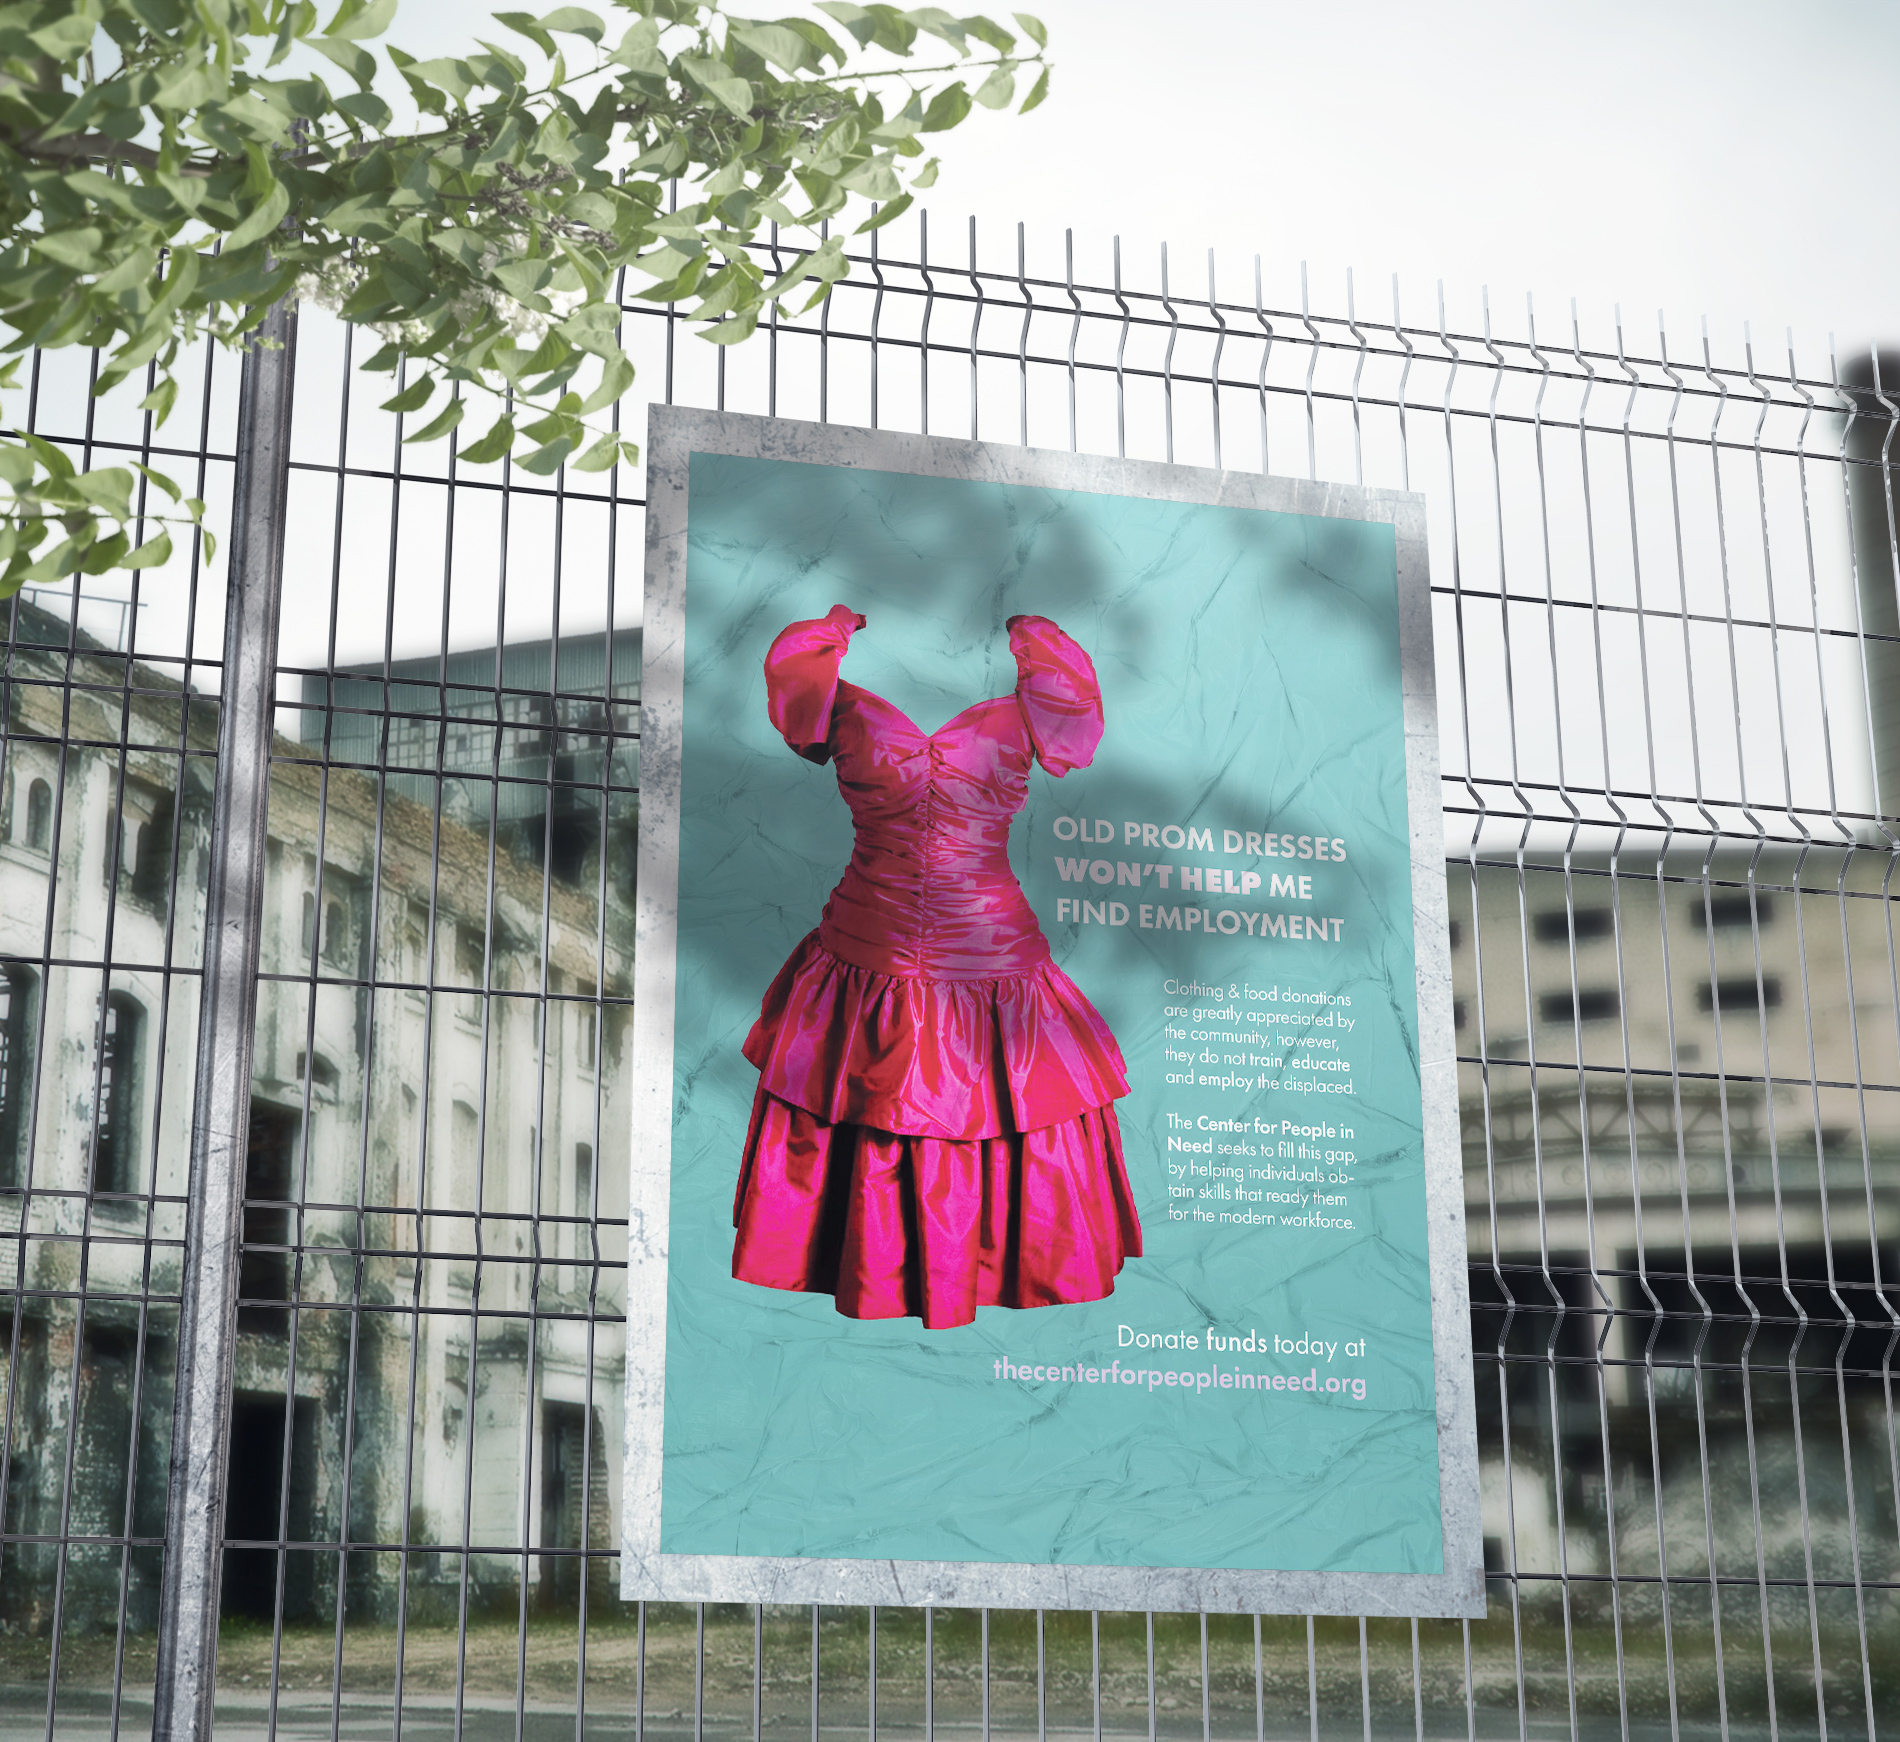 Prom dress poster for Center For People in Need